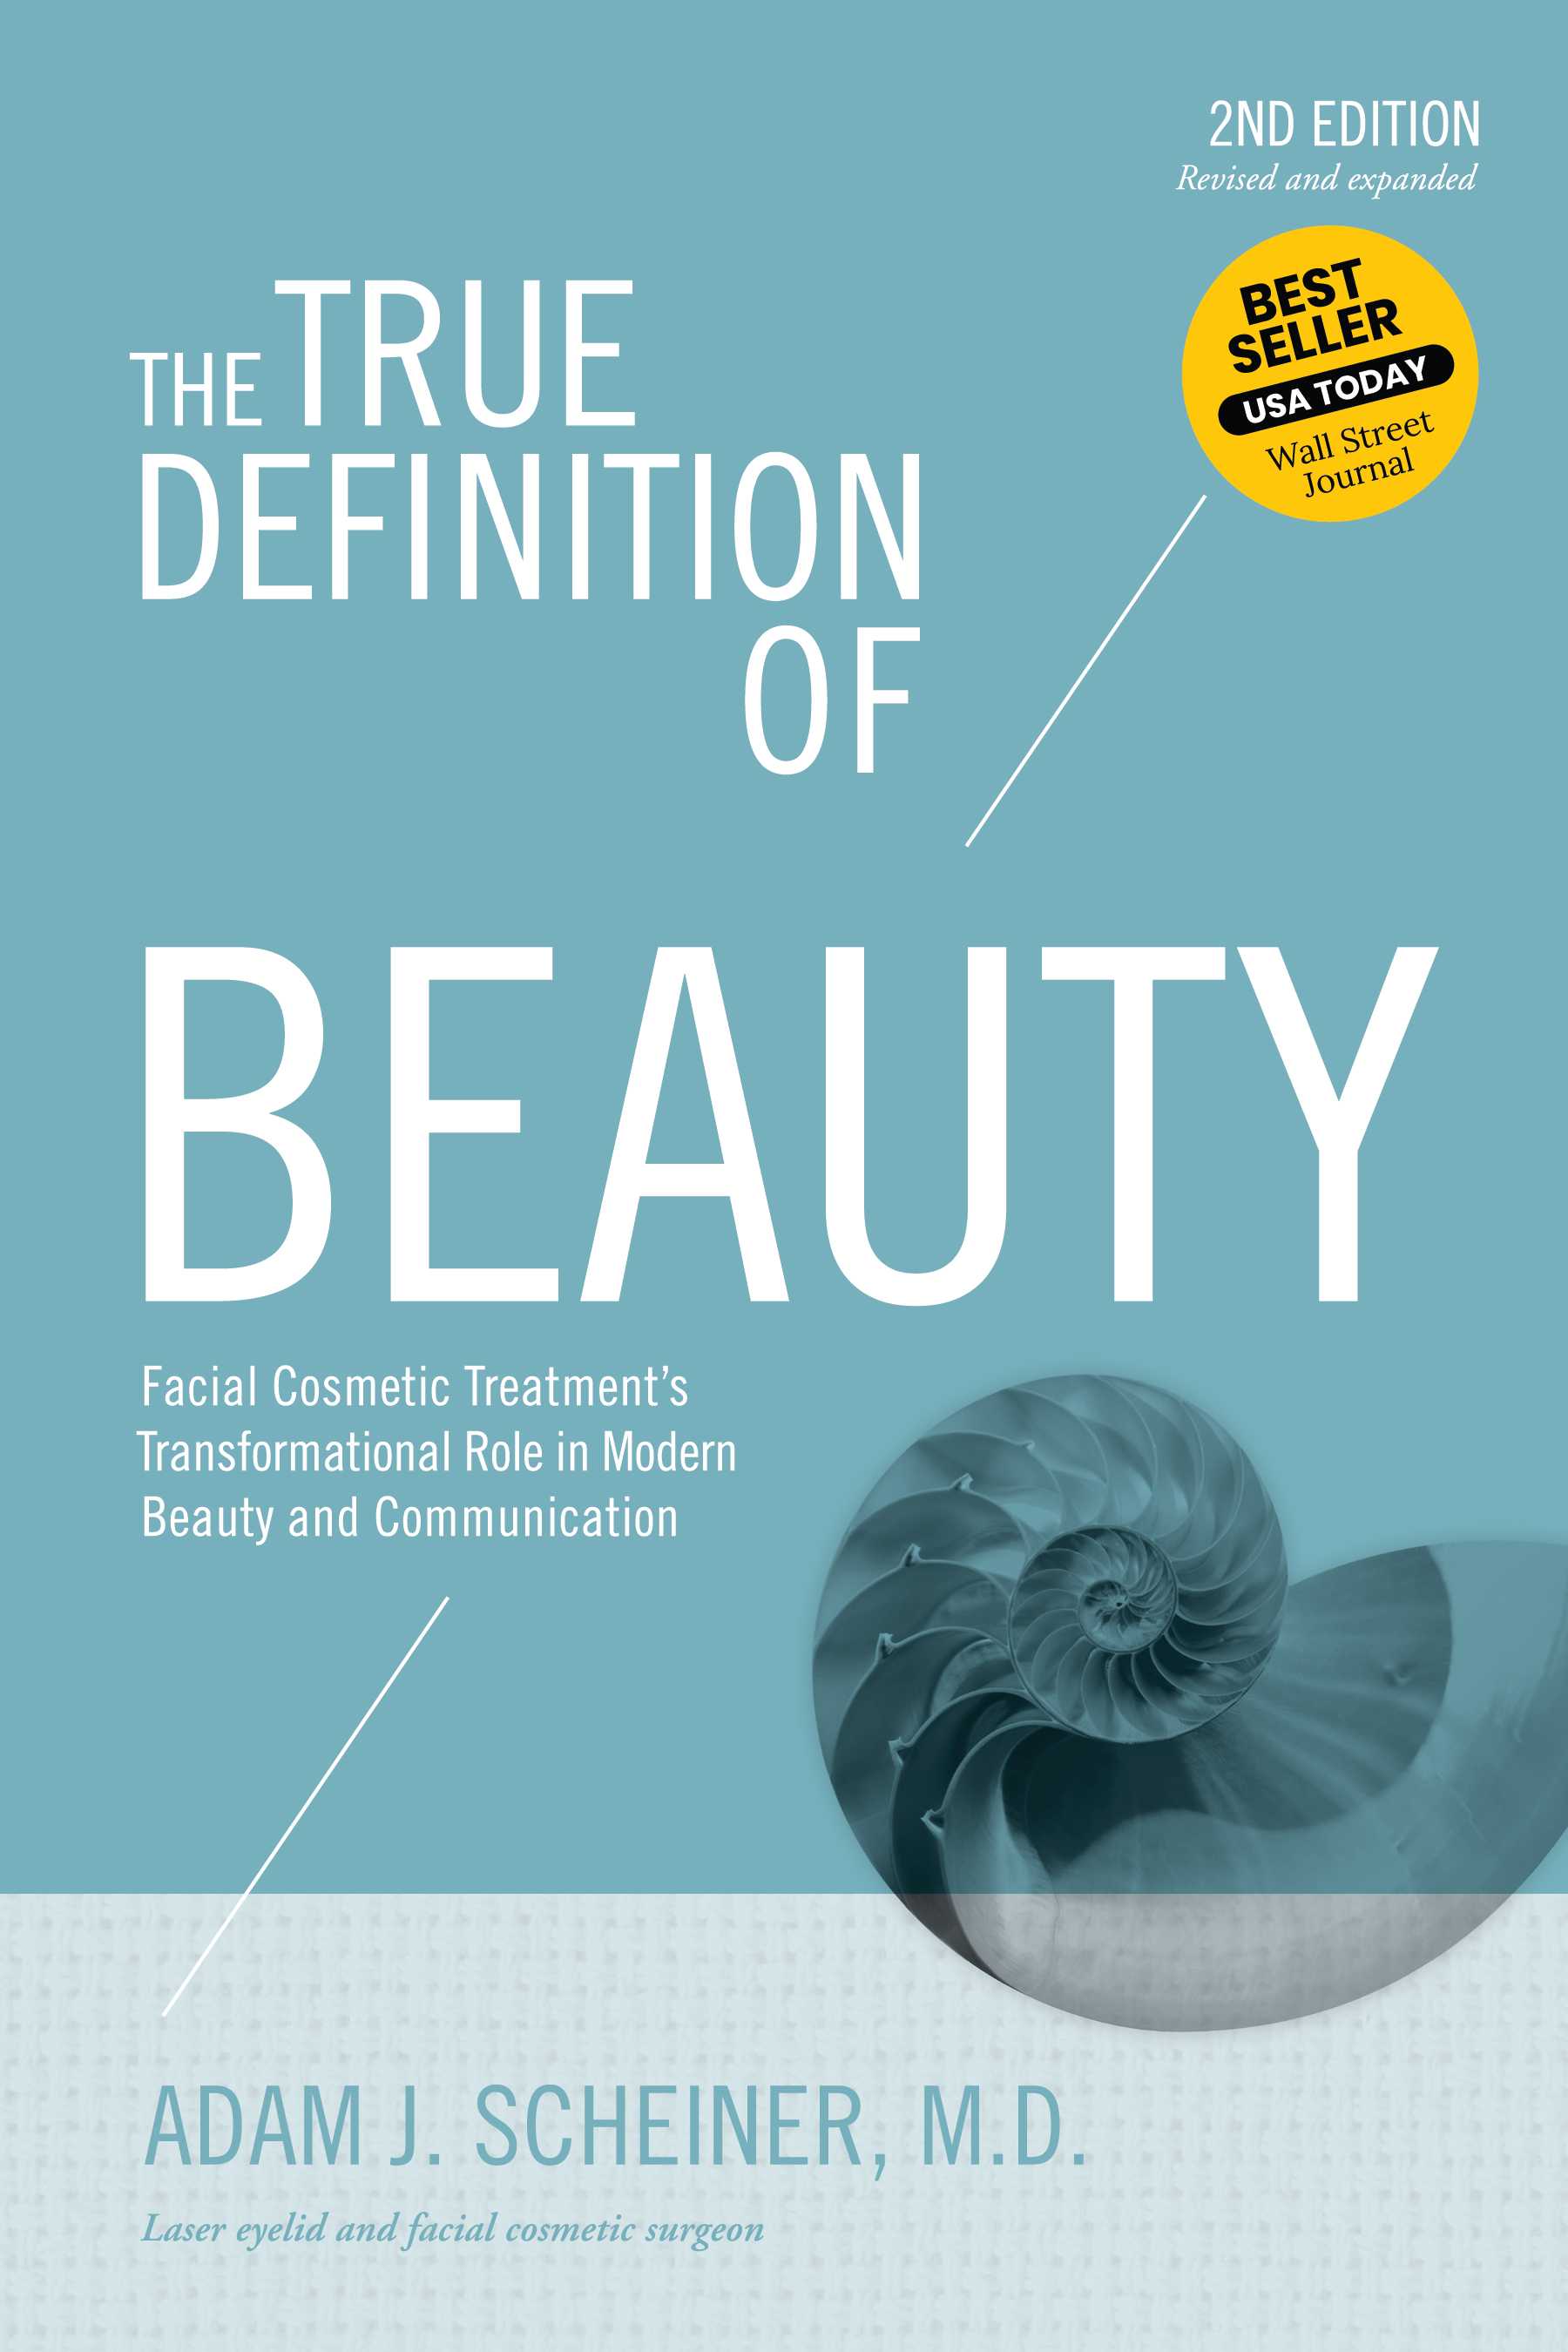 Book cover: the true definition of beauty. Facial costmetic treatment's transformation role in modern beauty and communication by Adam J. Scheiner, M.D. Laser eylid and fascial cosmetic surgeon.